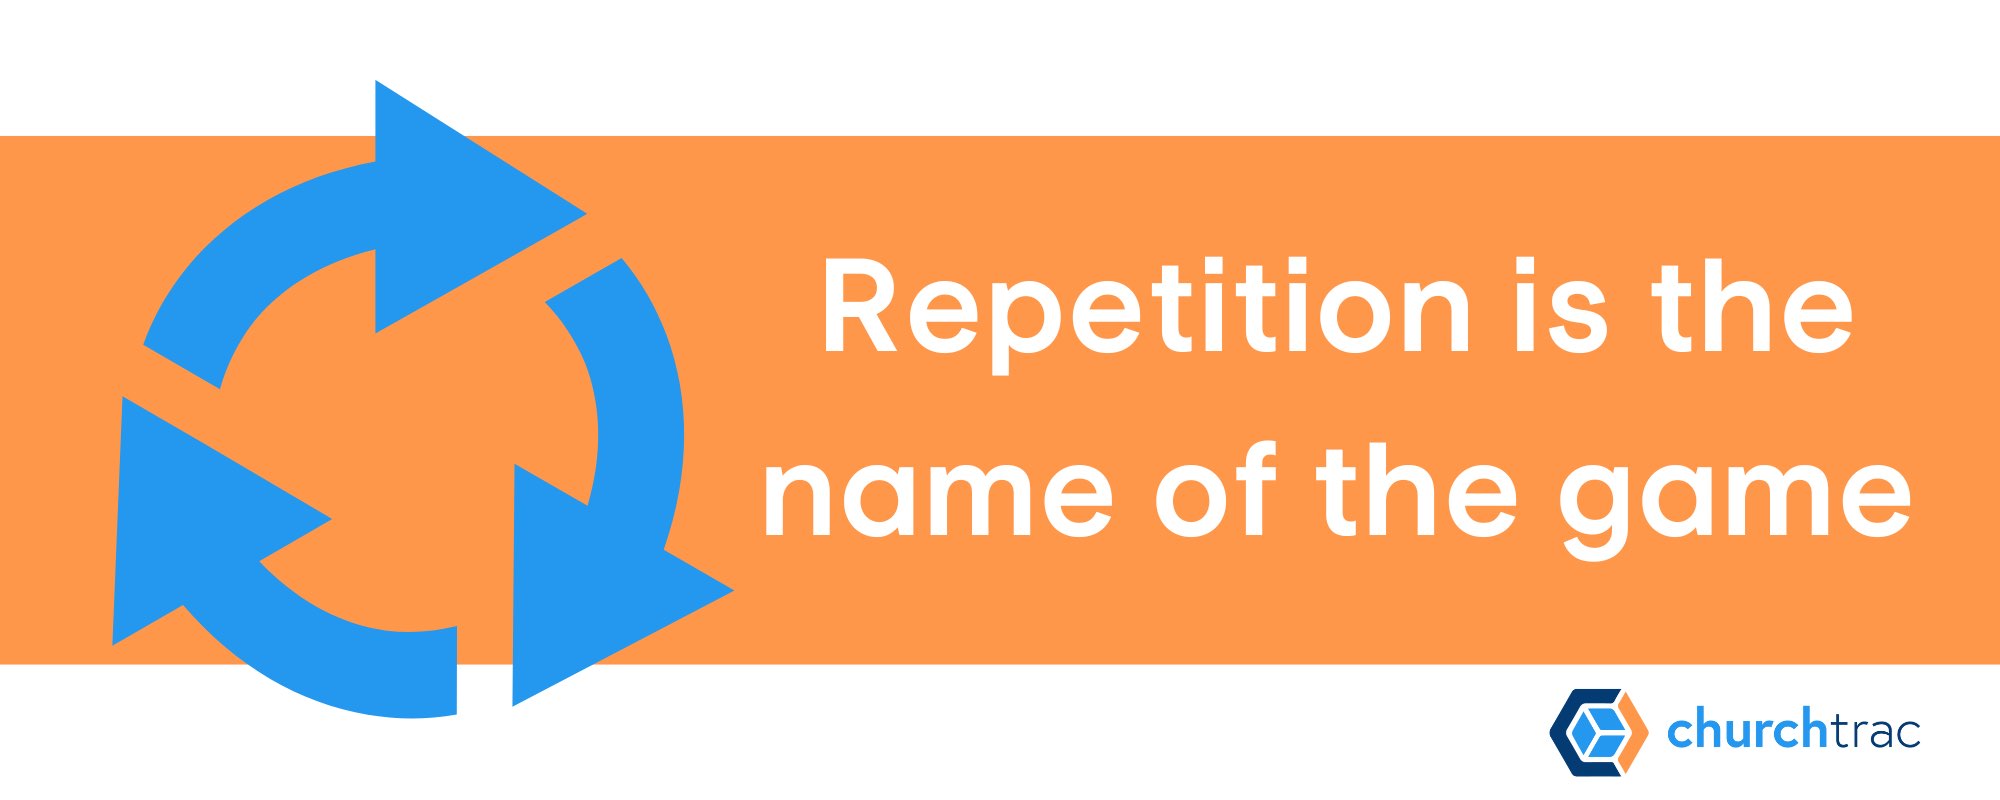 Repetition is necessary to help your members remember something new